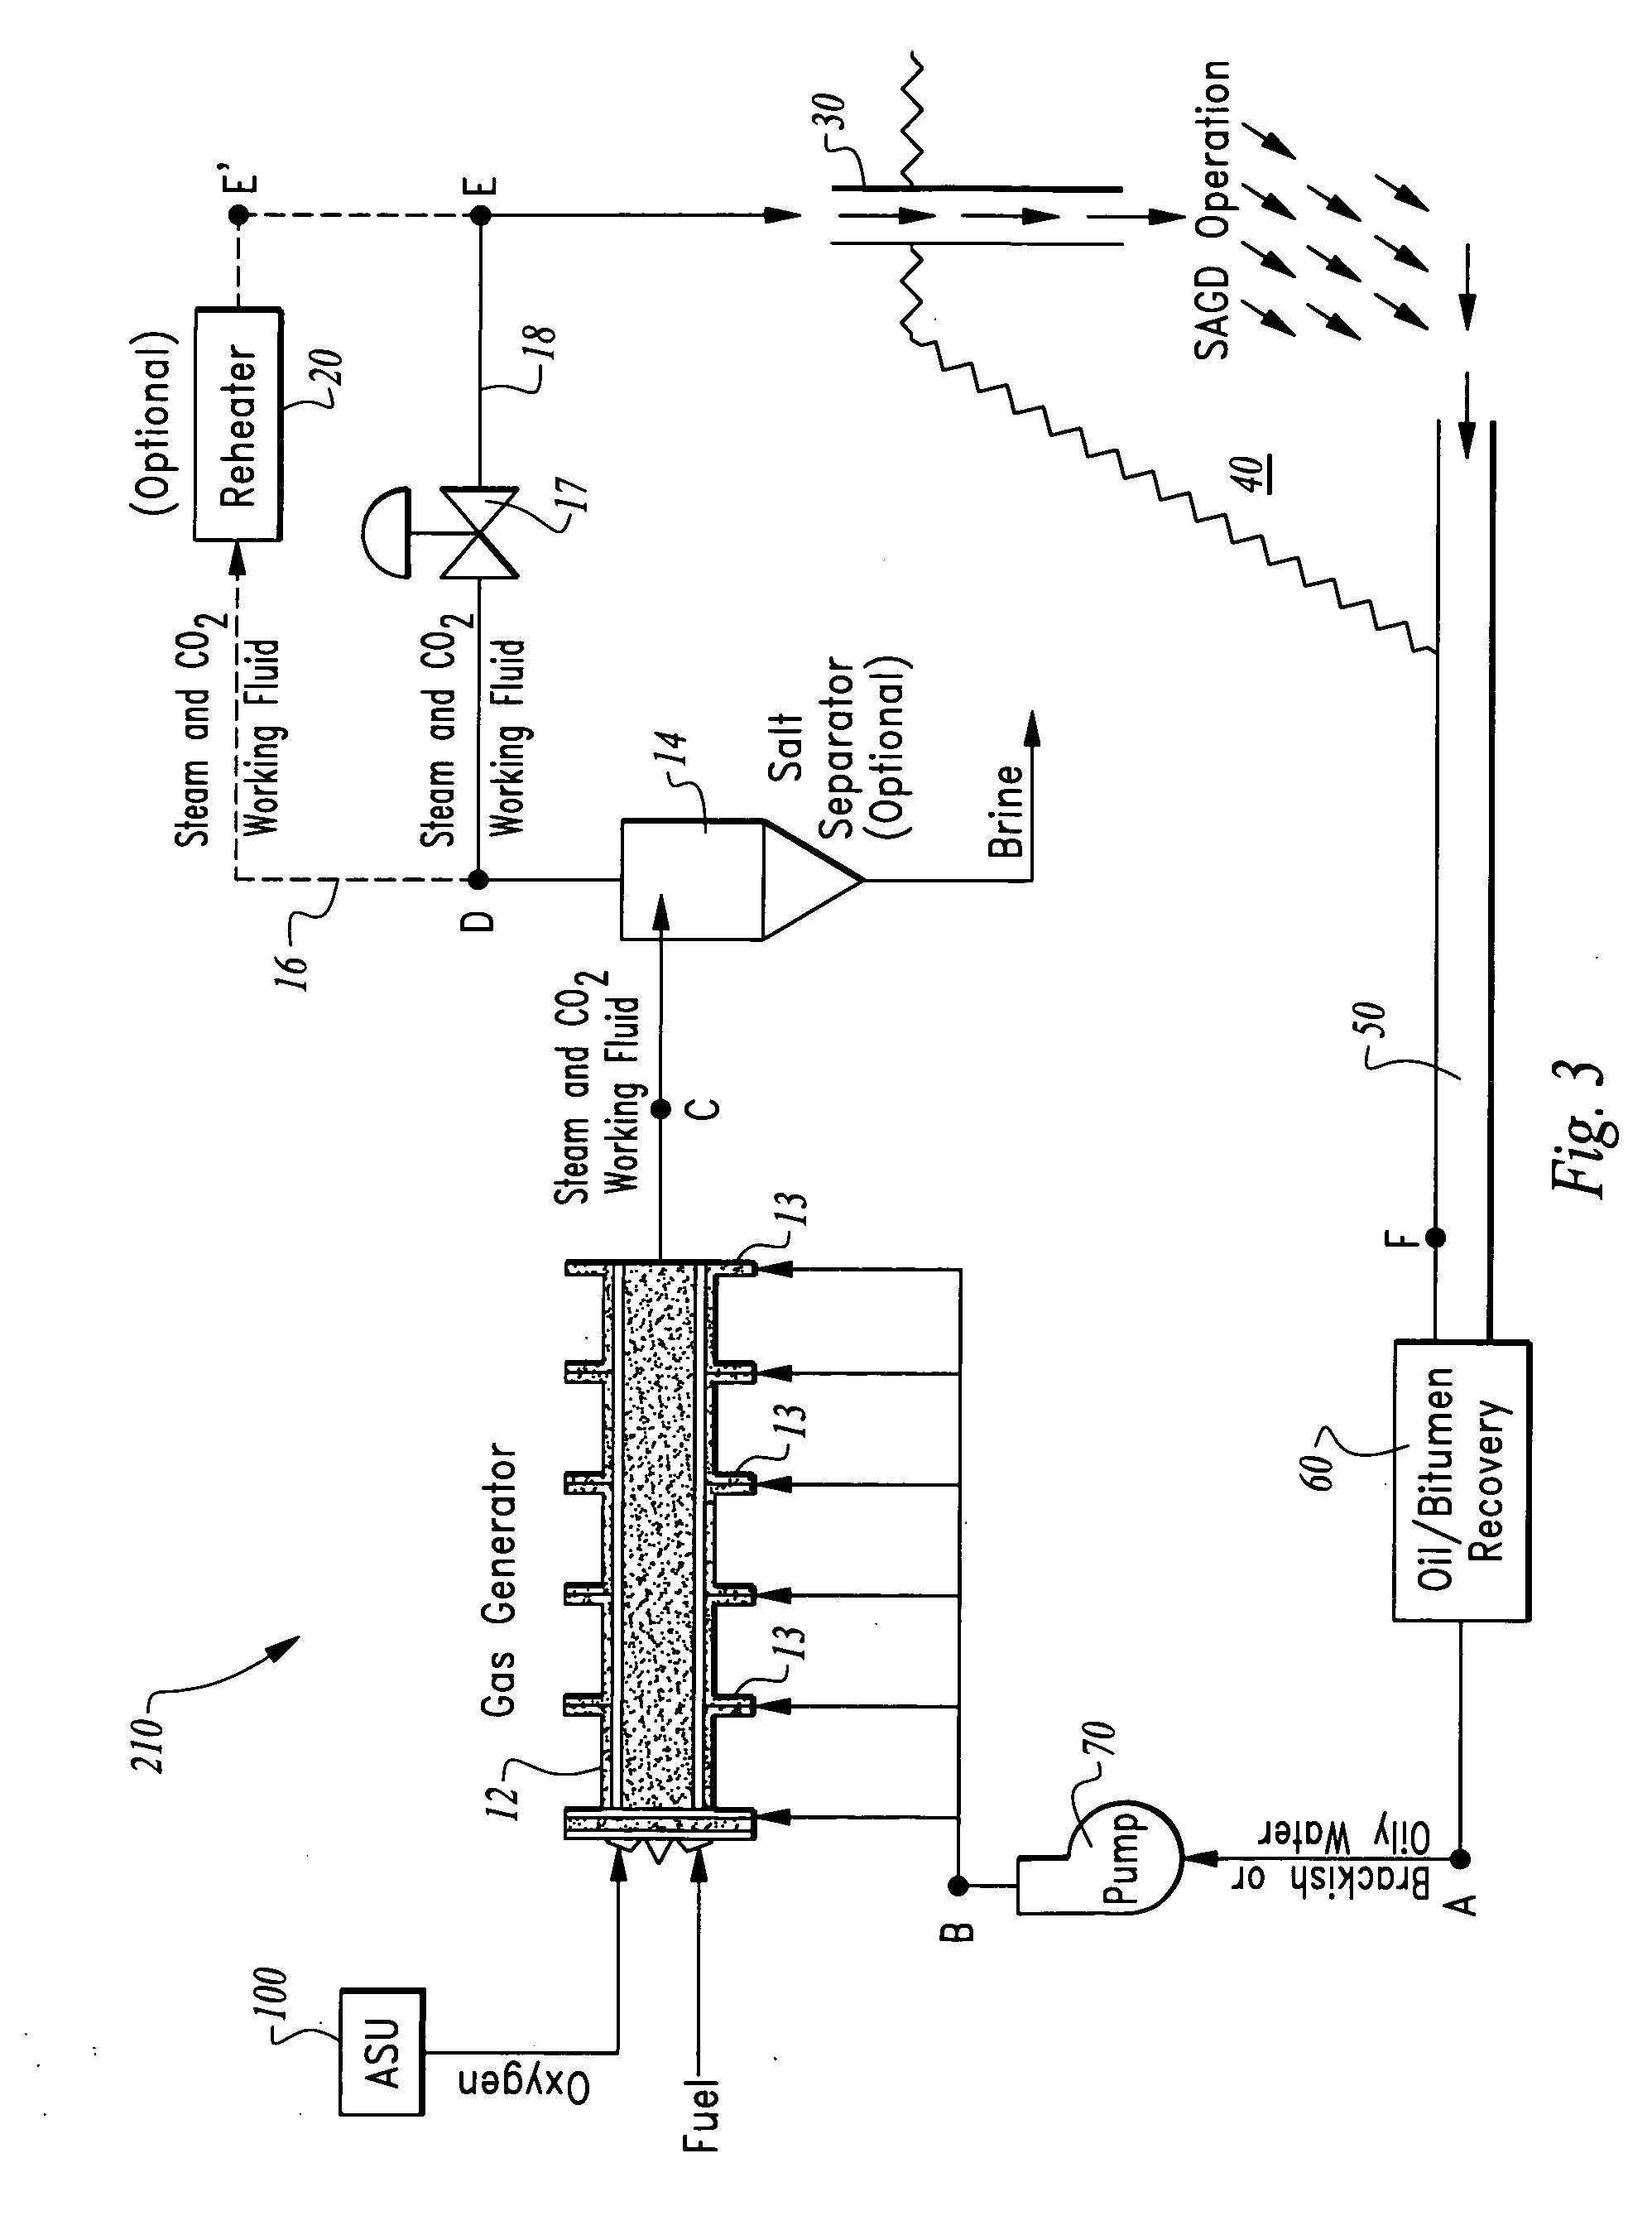 Method of direct steam generation using an oxyfuel combustor